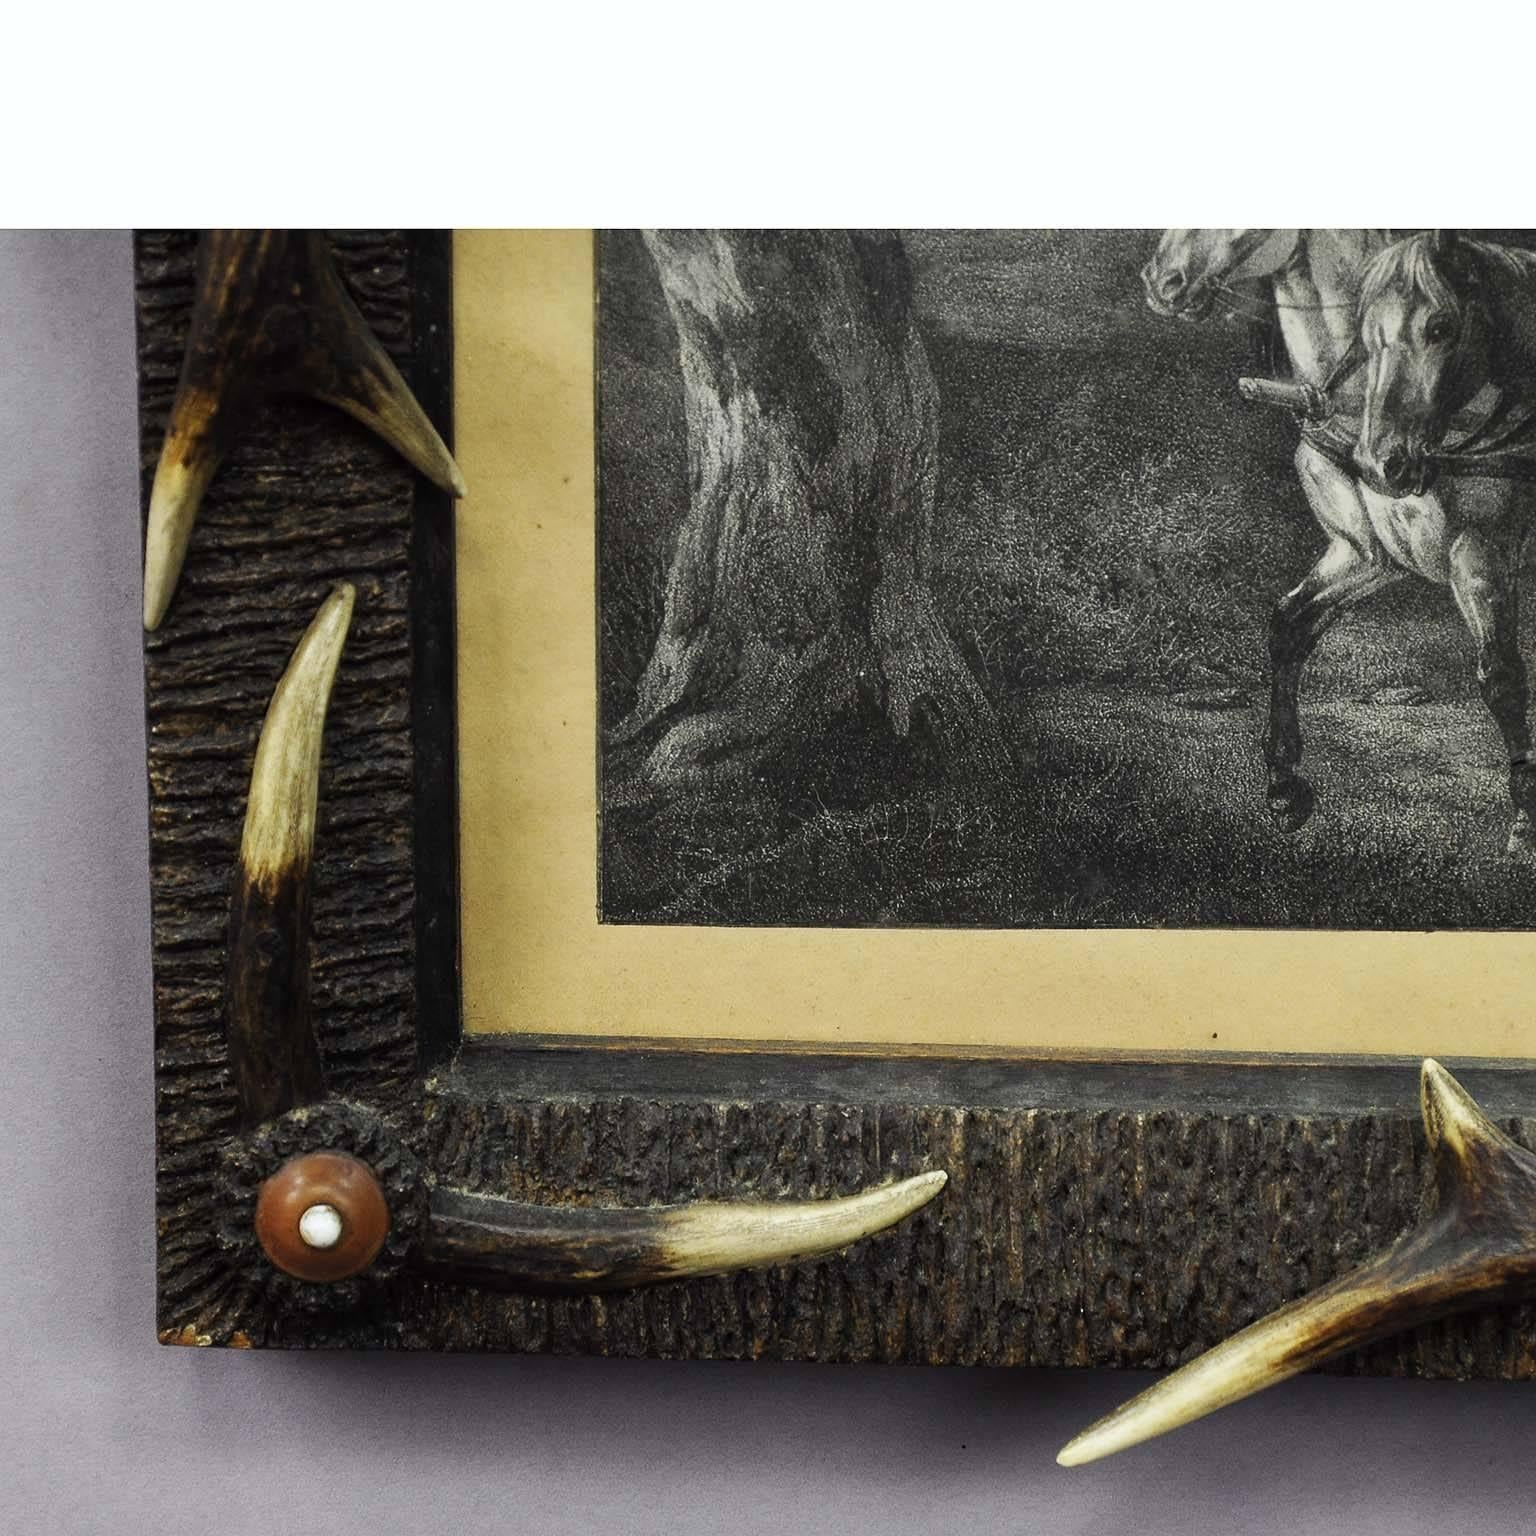 A small antler frame decorated with deer antlers and turned horn roses. Wooden frame covered with stucco imitating antler veneer. Inside an antique copperplate print with scenery in the forest.